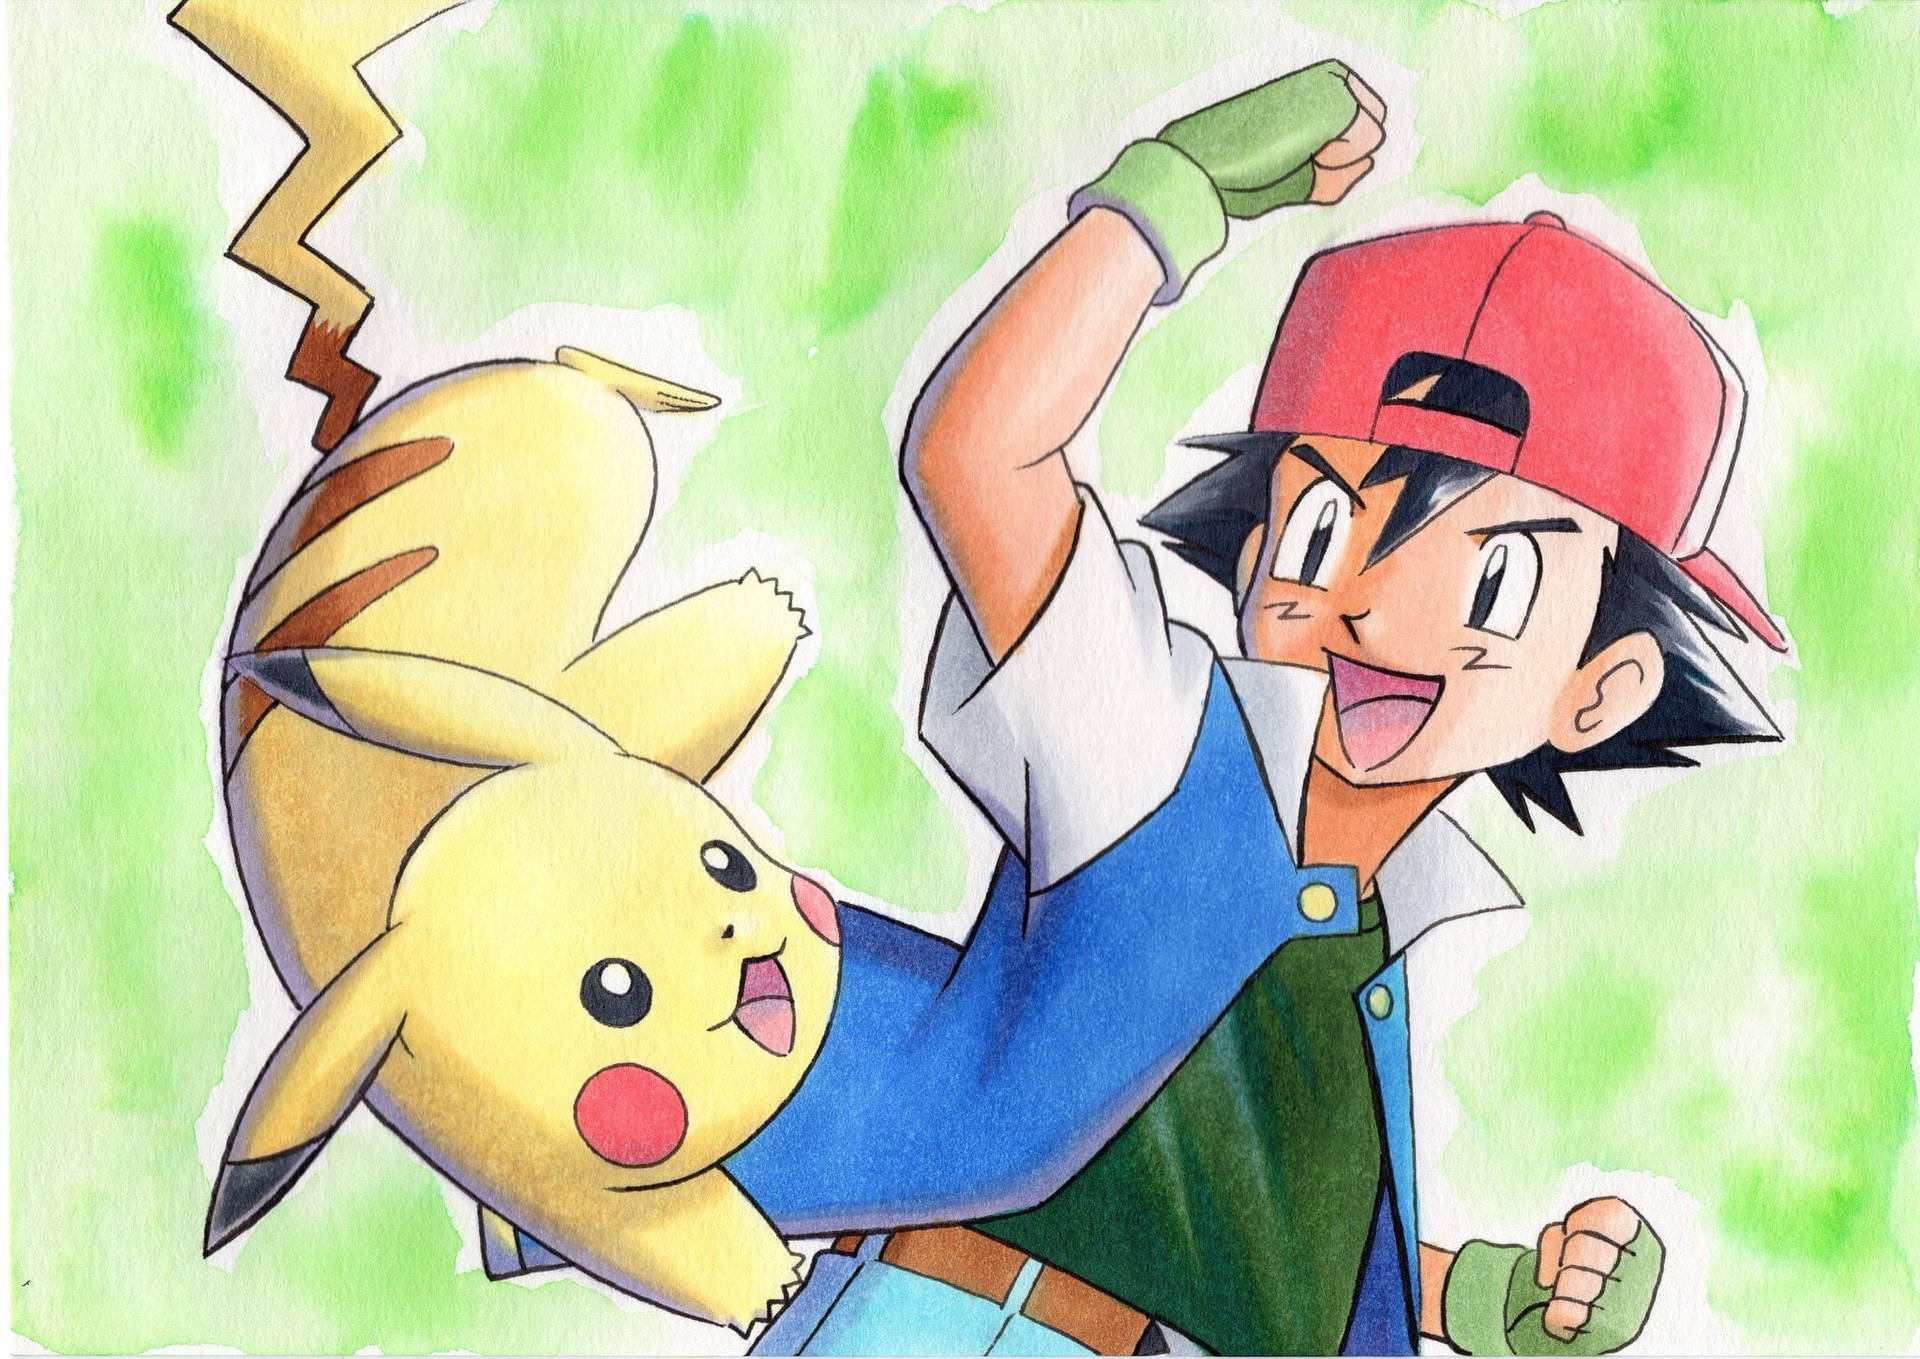 Ash And Pikachu Hd Graphic With Raised Fist Wallpaper